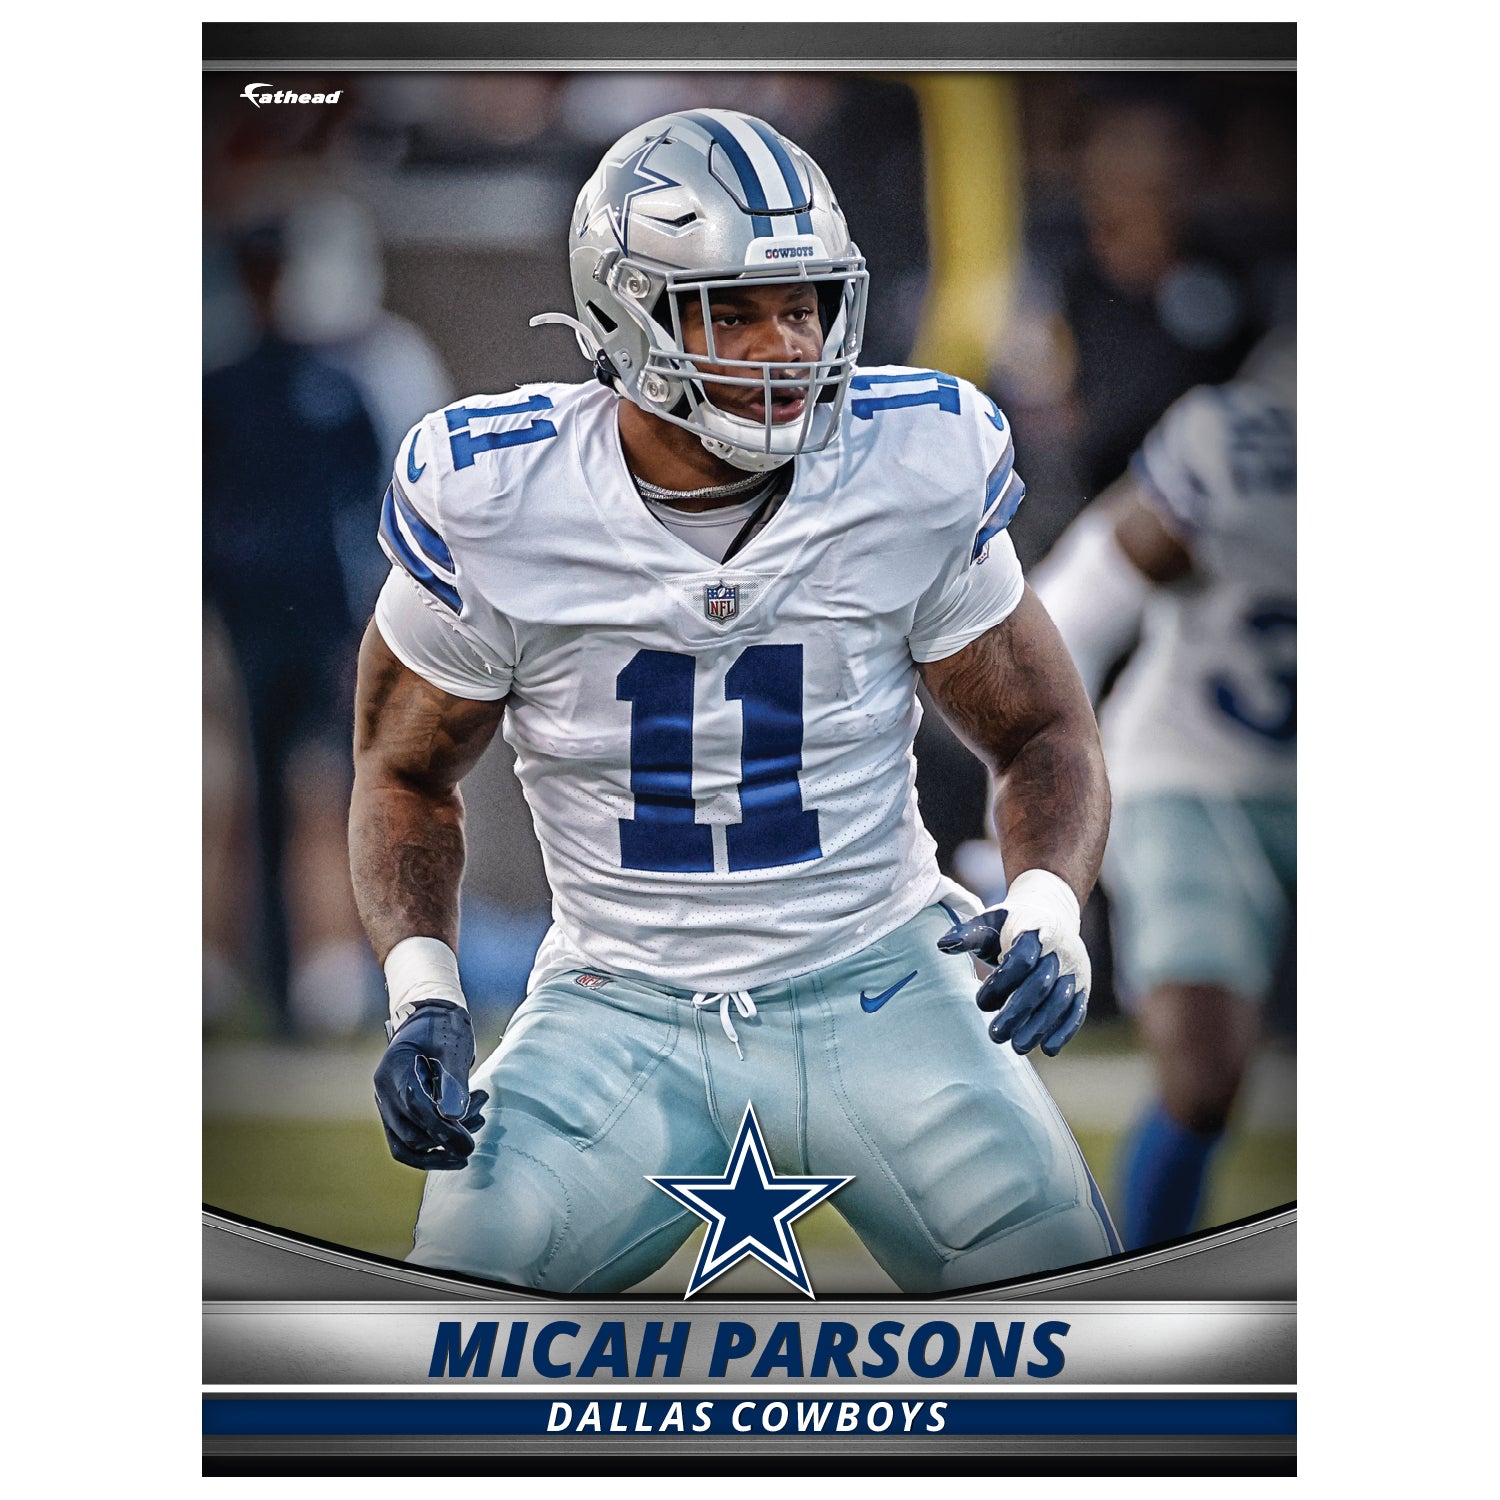 Red Raider Outfitter Dallas Cowboys NFL Official #11 Micah Parsons Game Jersey in Blue, Size: XL, Sold by Red Raider Outfitters